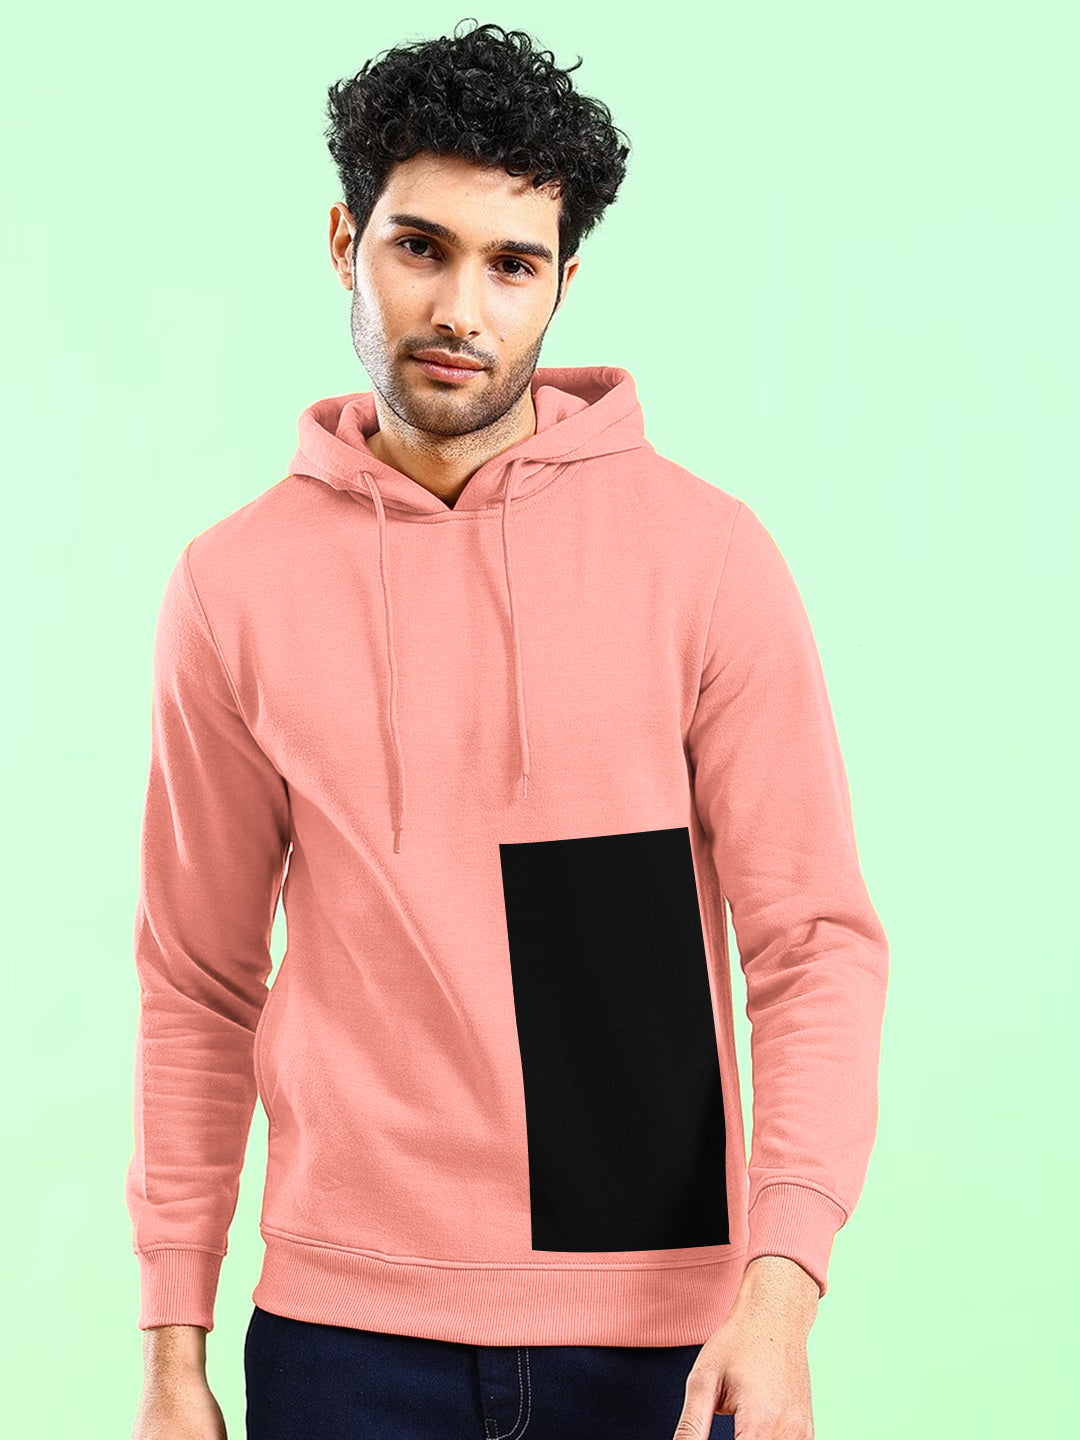 Next Fleece Pullover Hoodie For Men-Peach with Black Panel-BE297